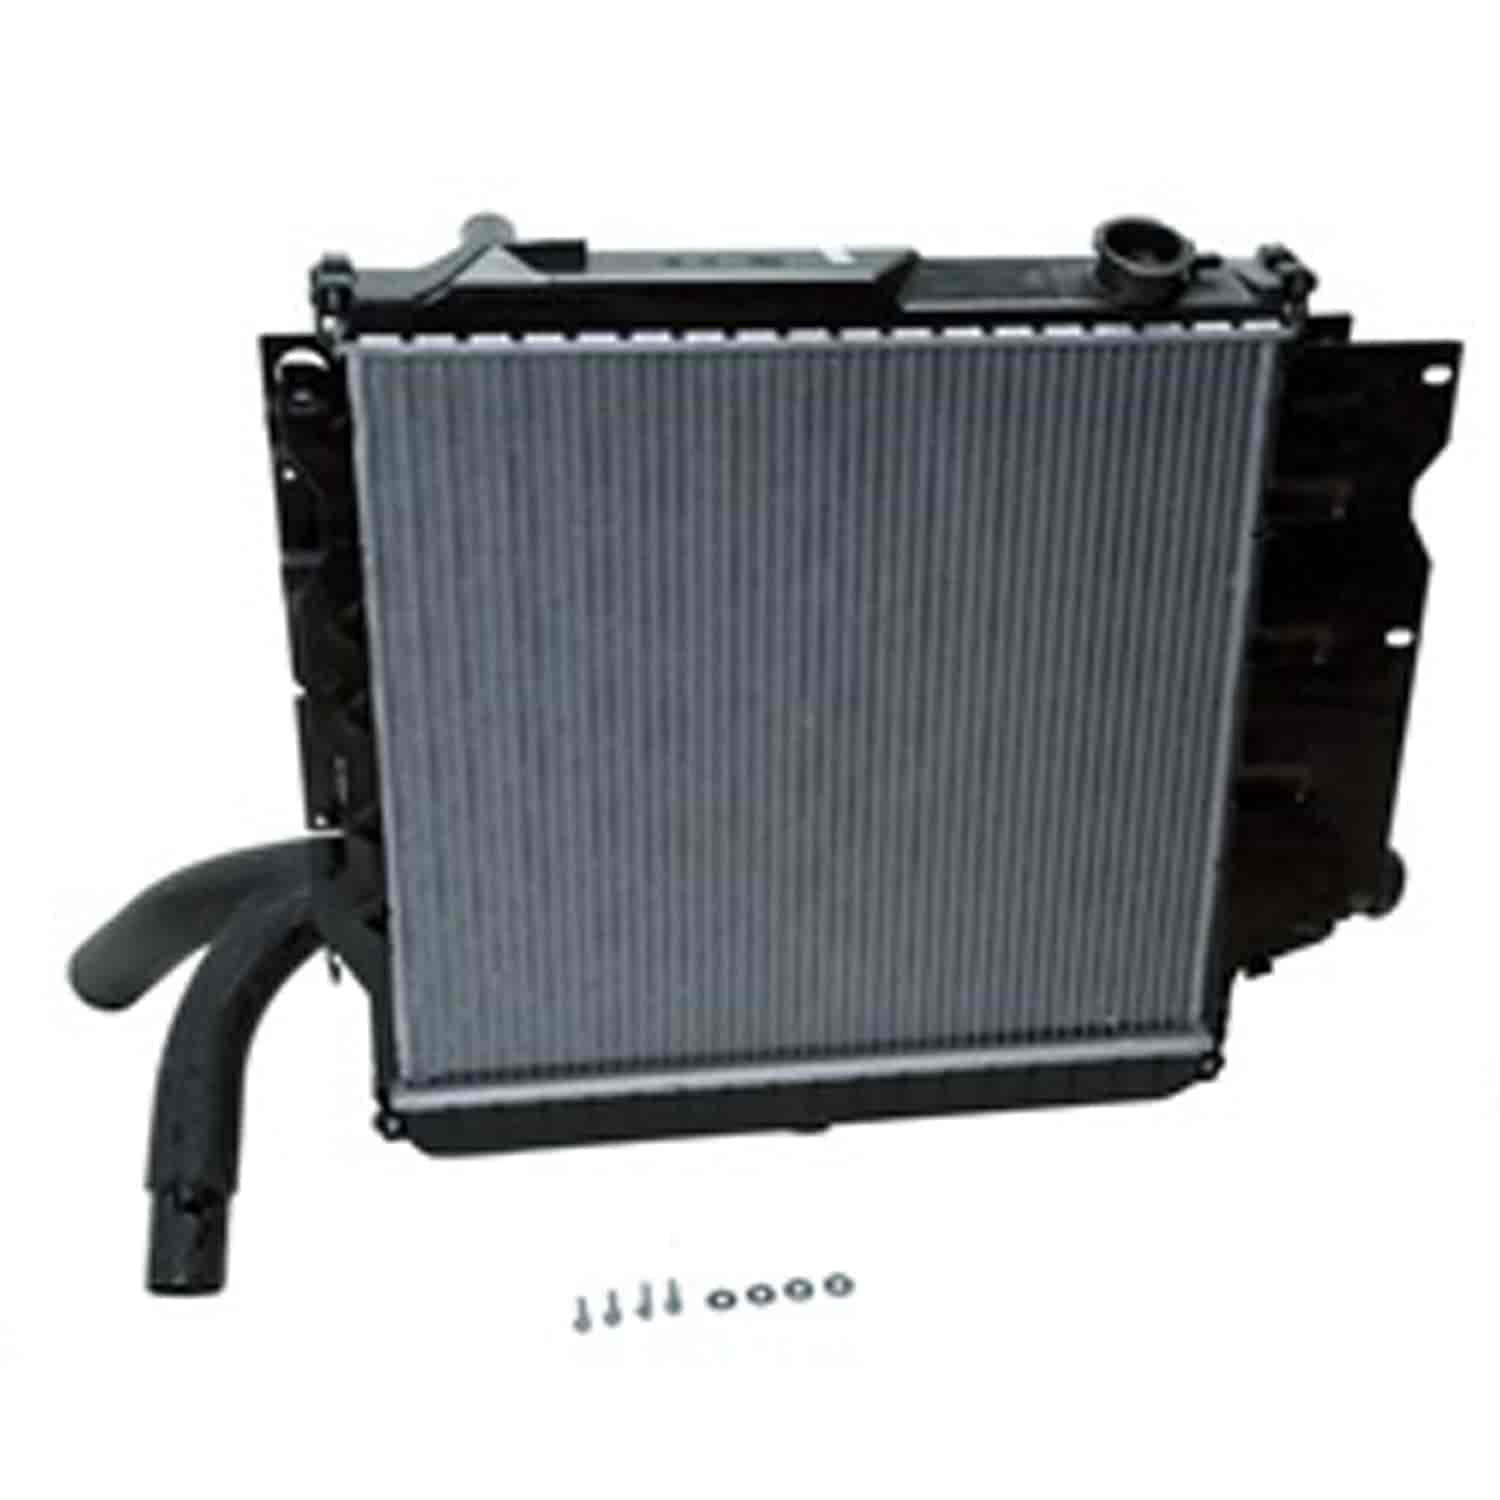 This 1 row radiator from Omix-ADA fits 1997-2006 Wrangler 2.4L 2.5L & 4.0L MT w/ or w/o AC 2004-2006